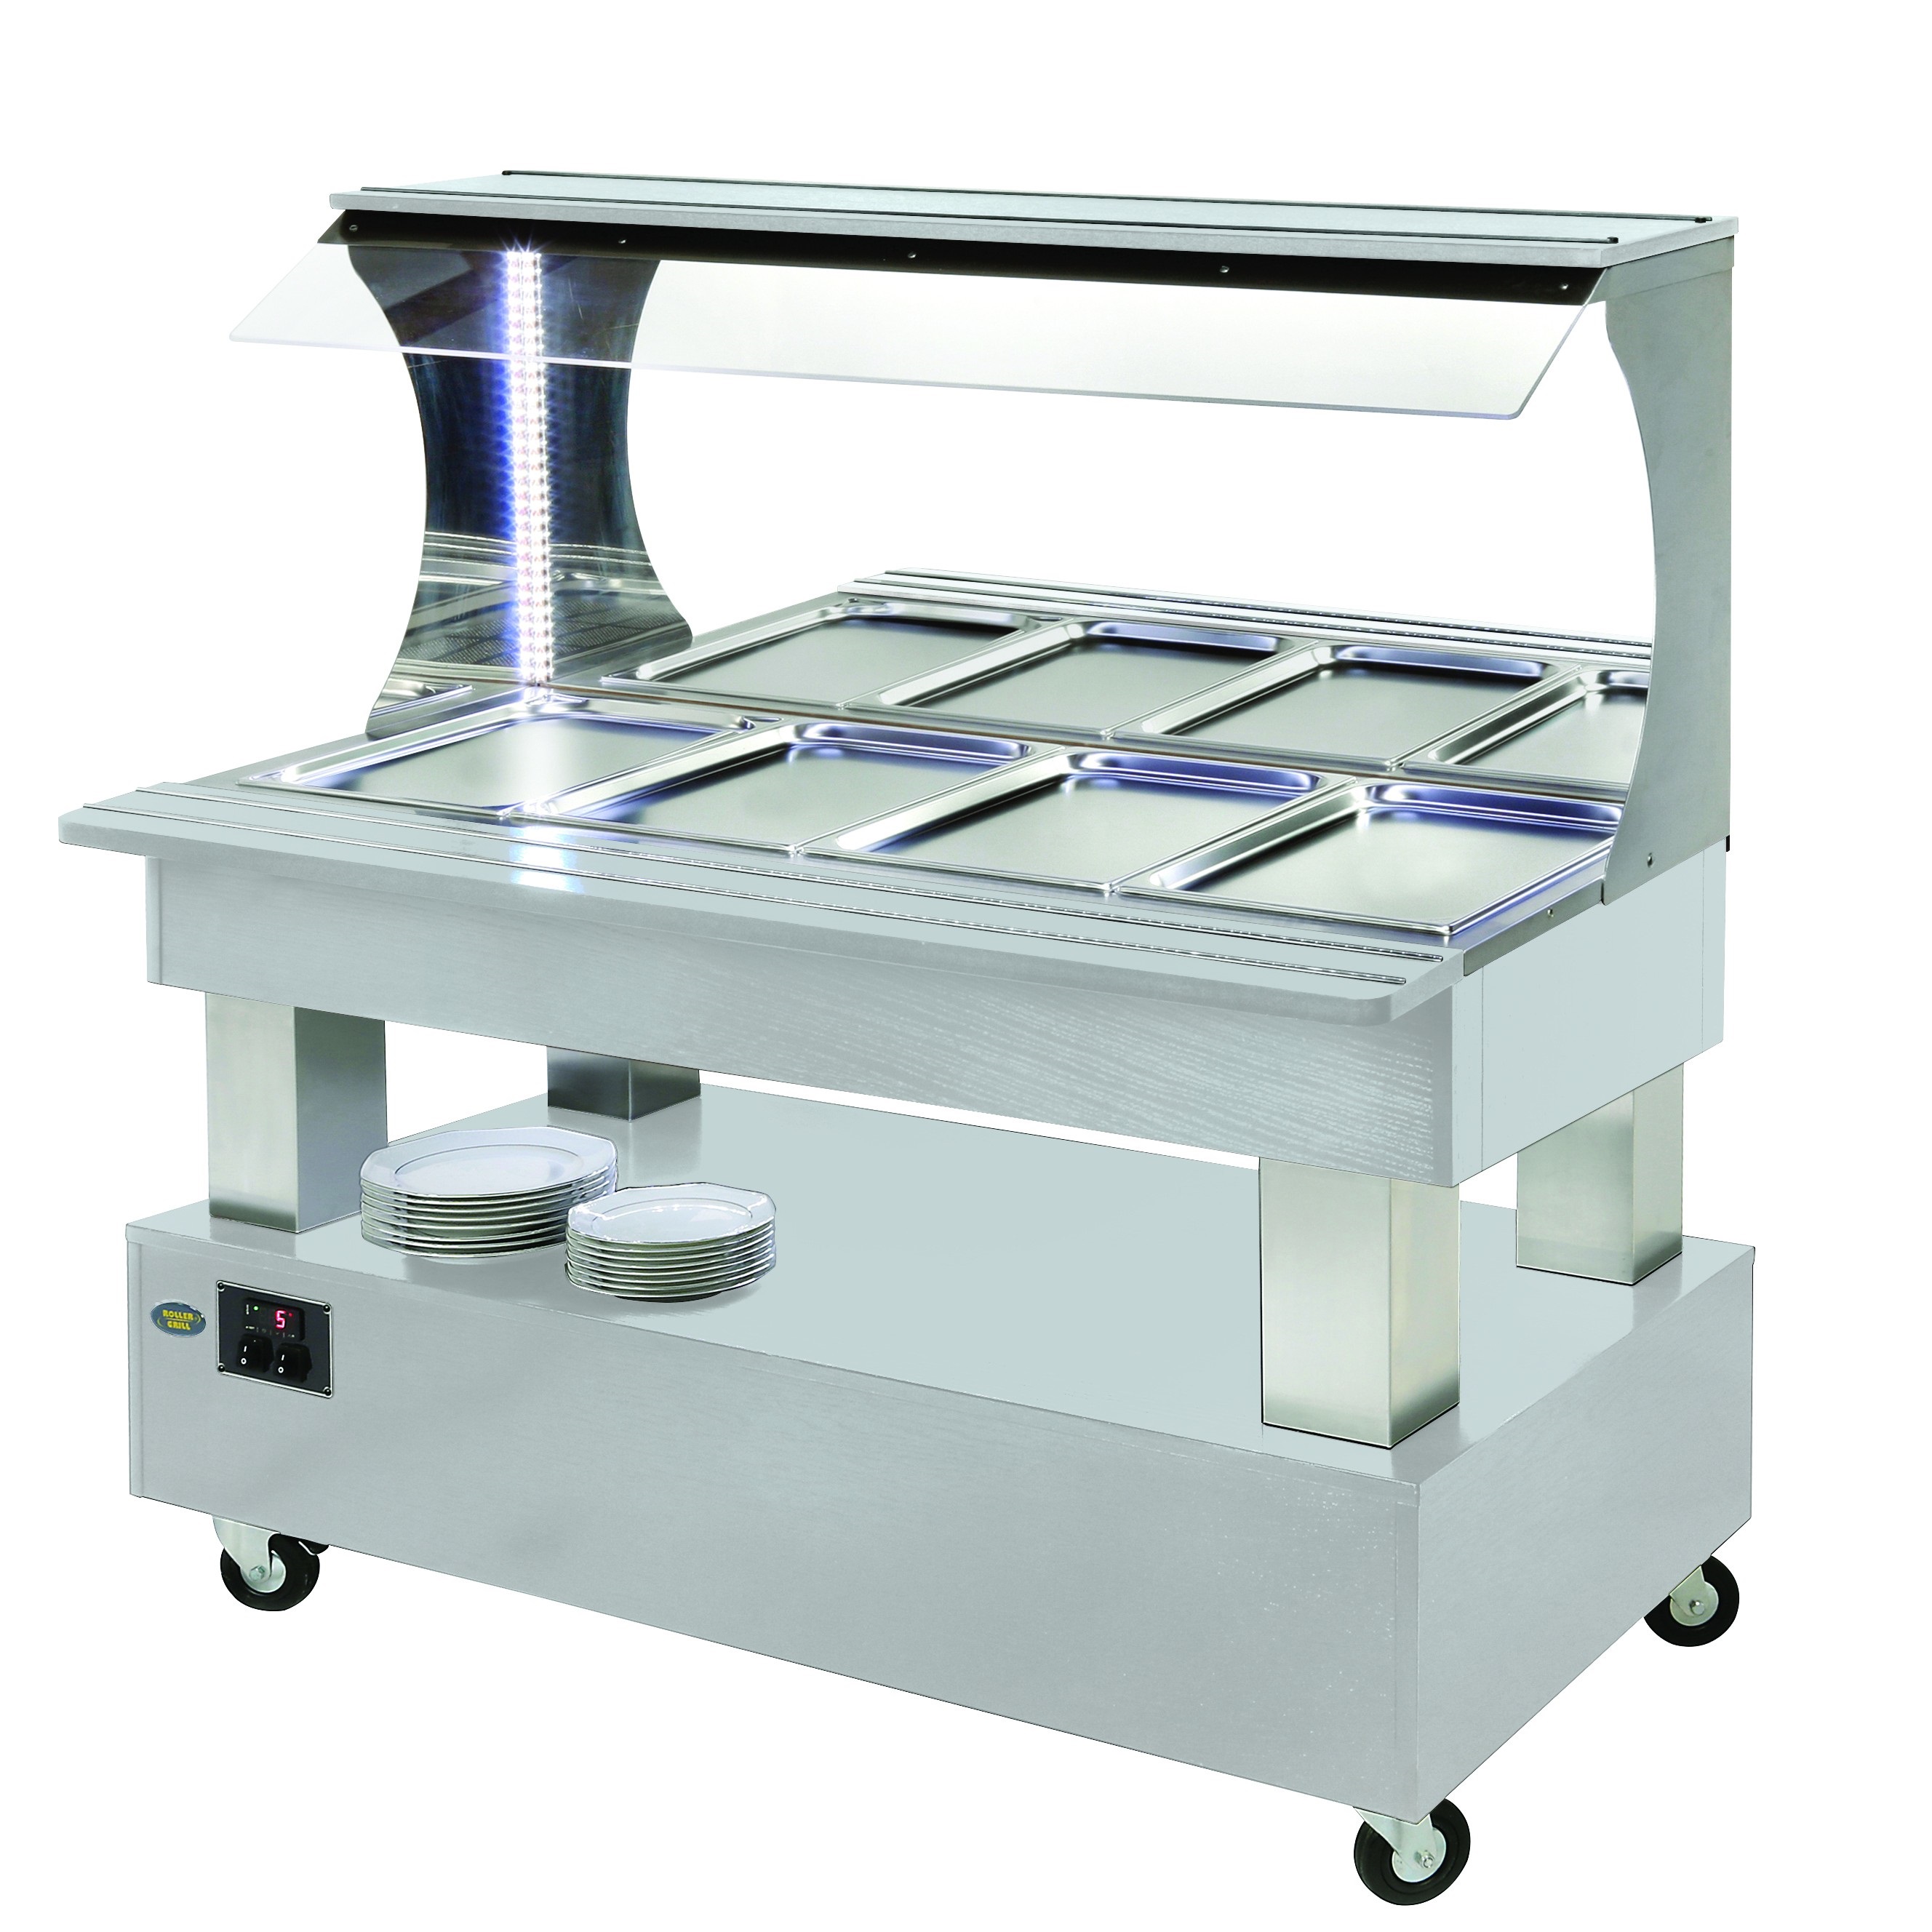 Roller Grill Refrigerated / Heated Buffet Bar in White SBM40M